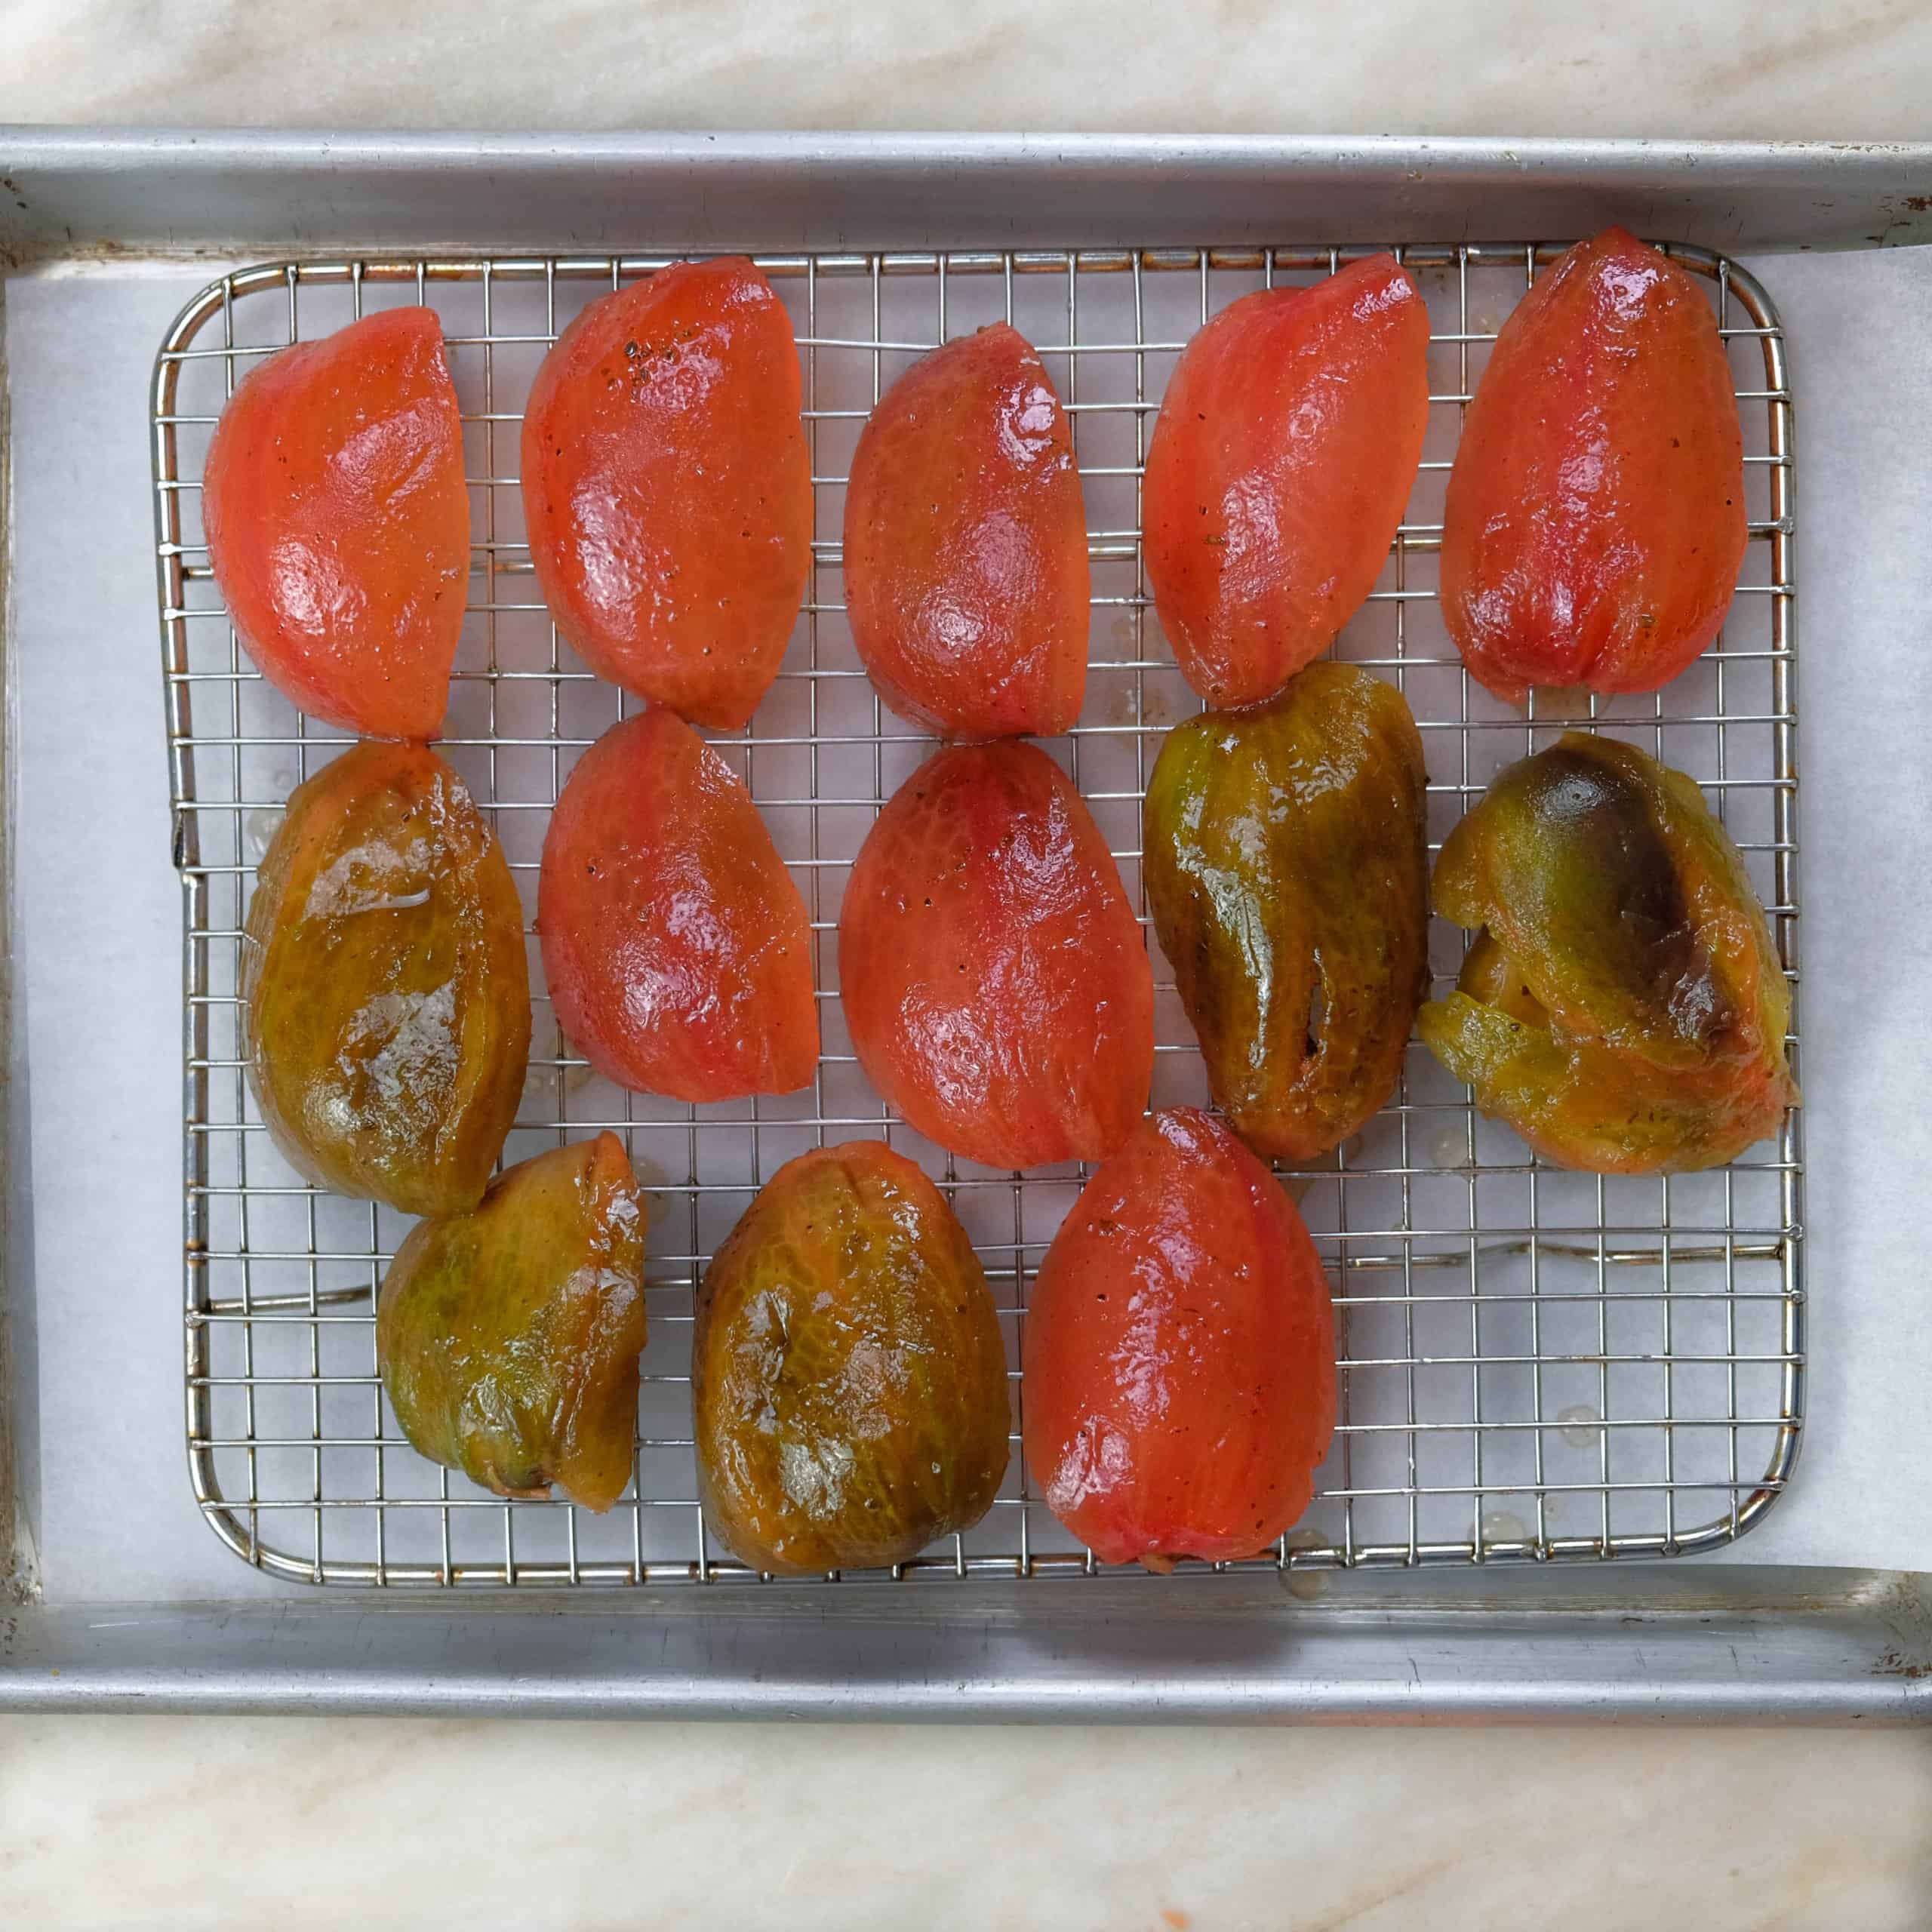 marinaded peeled and seeded tomatoes cut into quarters ready to bake